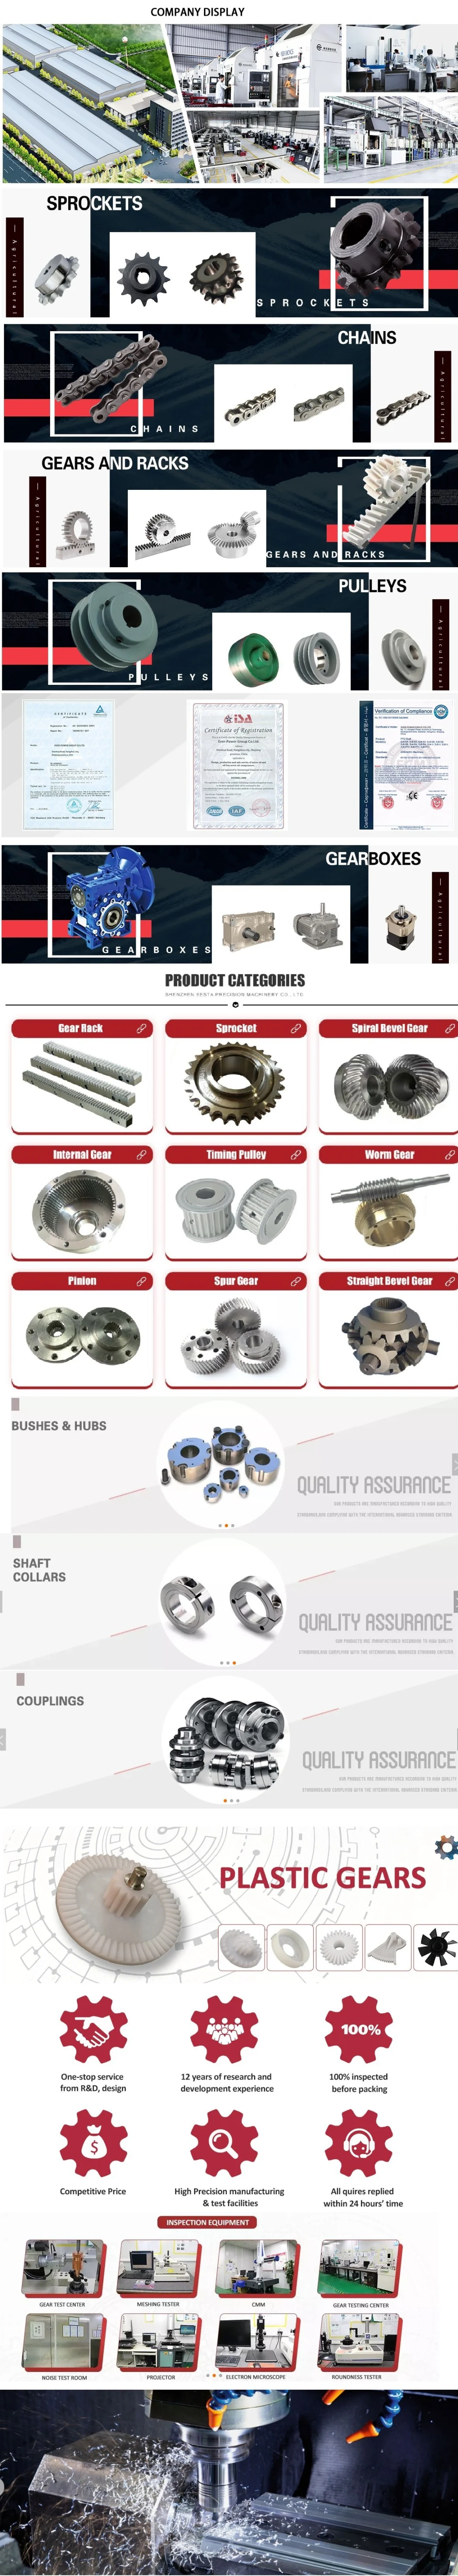 Gear Reduction Gearbox Gear Box Wheel High Quality Speed Reducer Jack Worm Planetary Helical Bevel Steering Gear Drive Manufacturer Industrial Gear Reductions